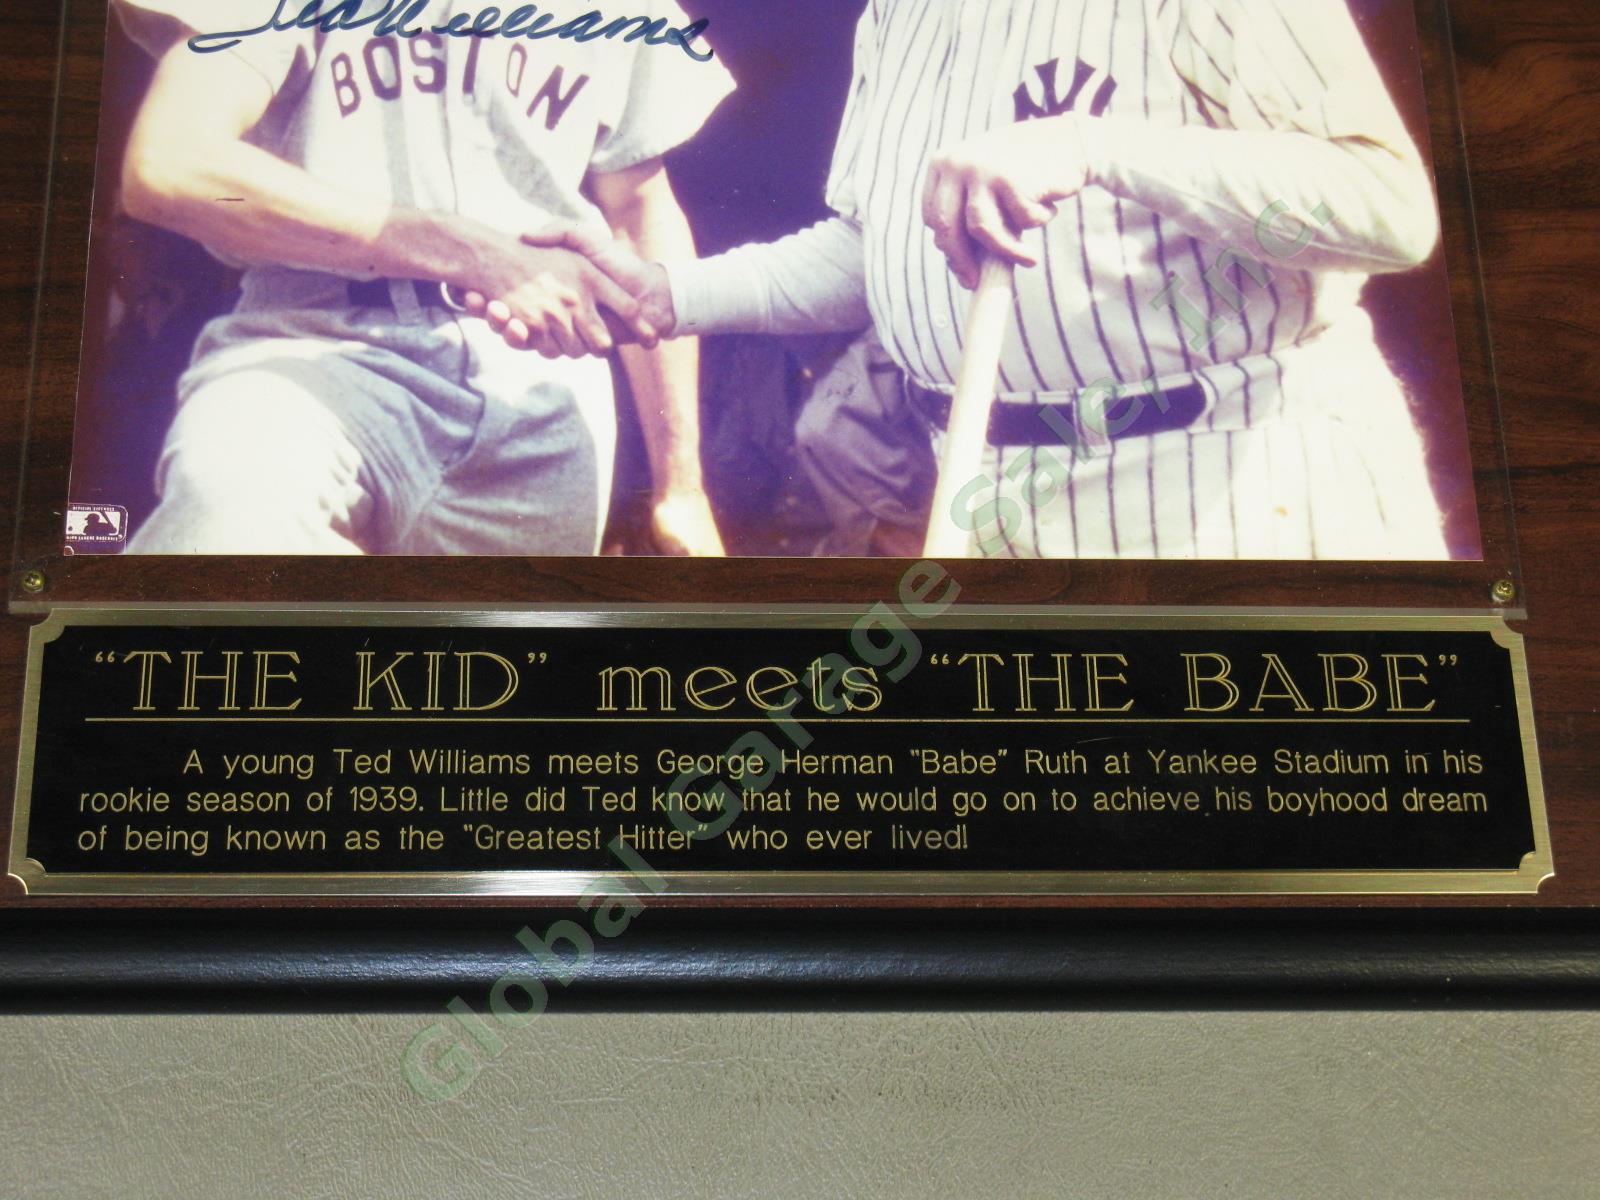 Ted Williams Signed 8x10 Photo Plaque w/ Babe Ruth The Kid Meets The Babe 1939 3